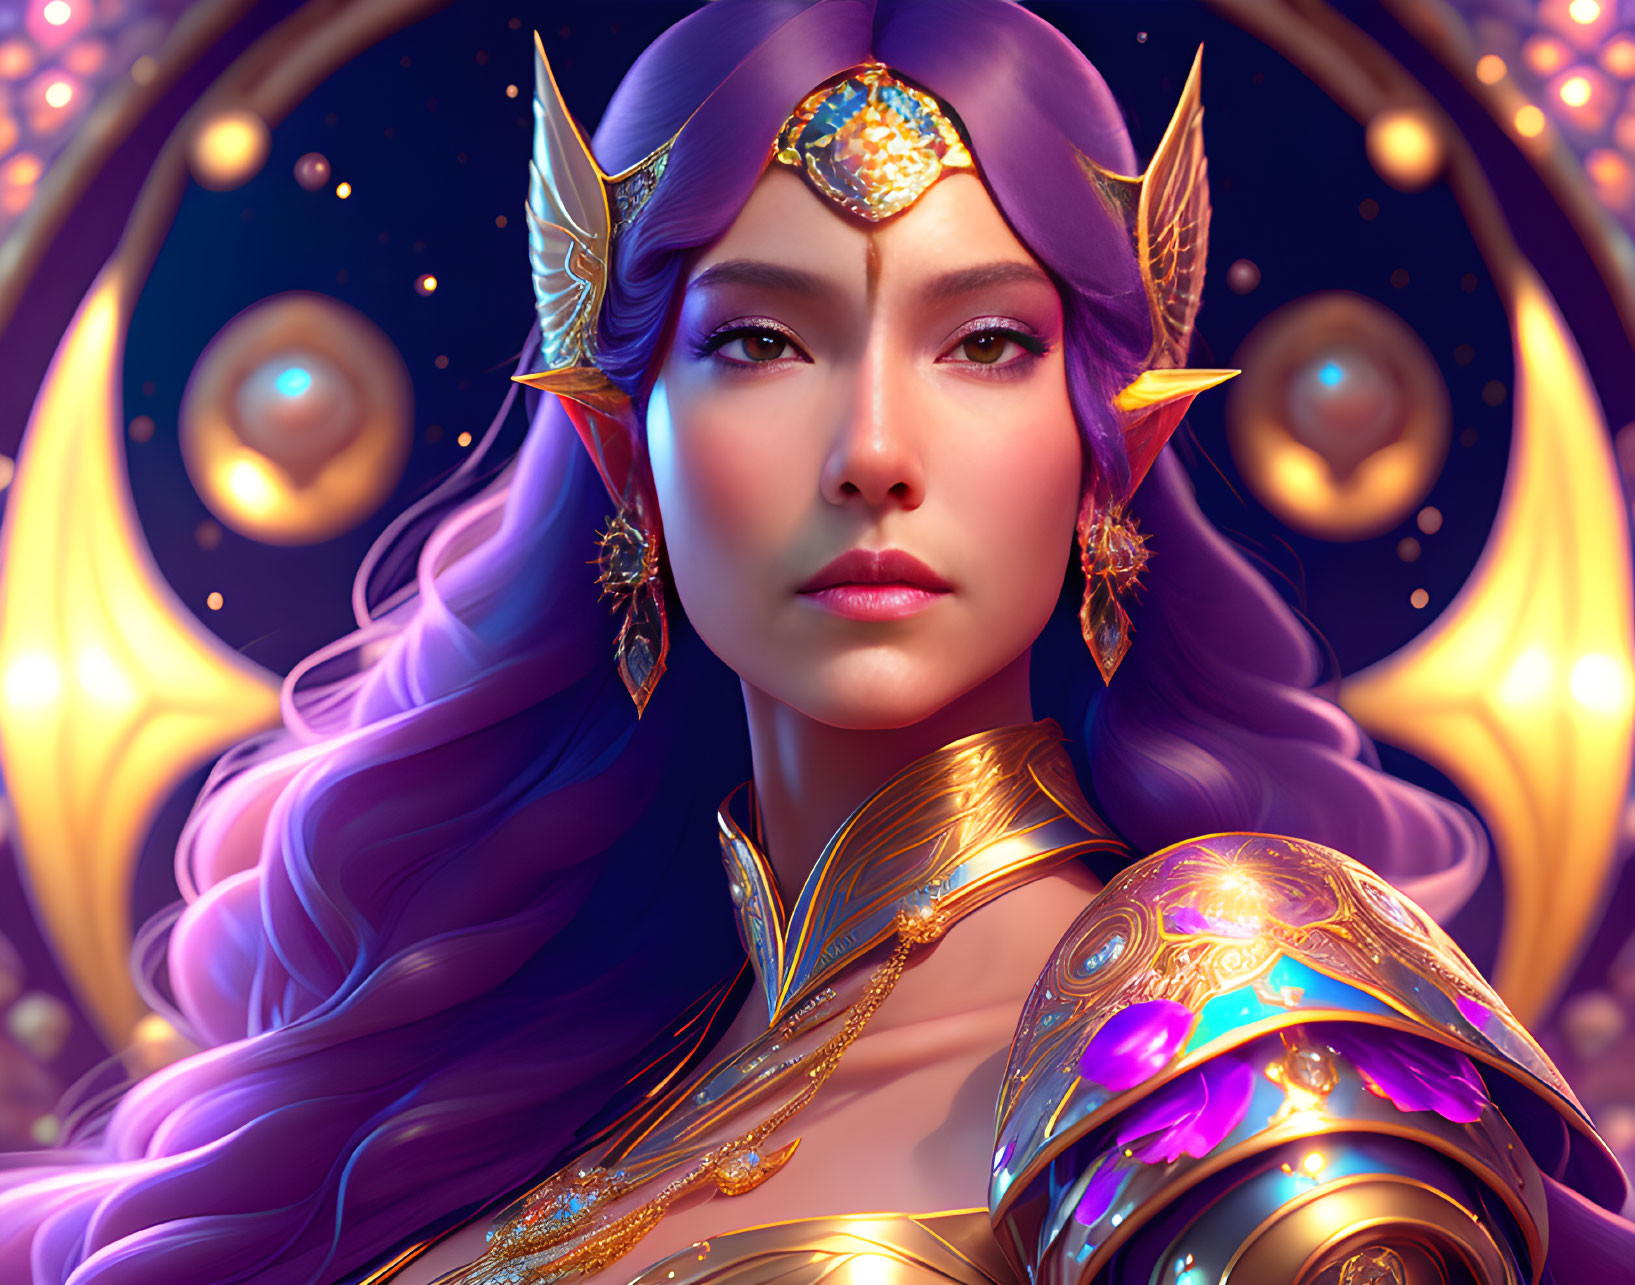 Majestic woman with purple hair in golden armor against mystical backdrop